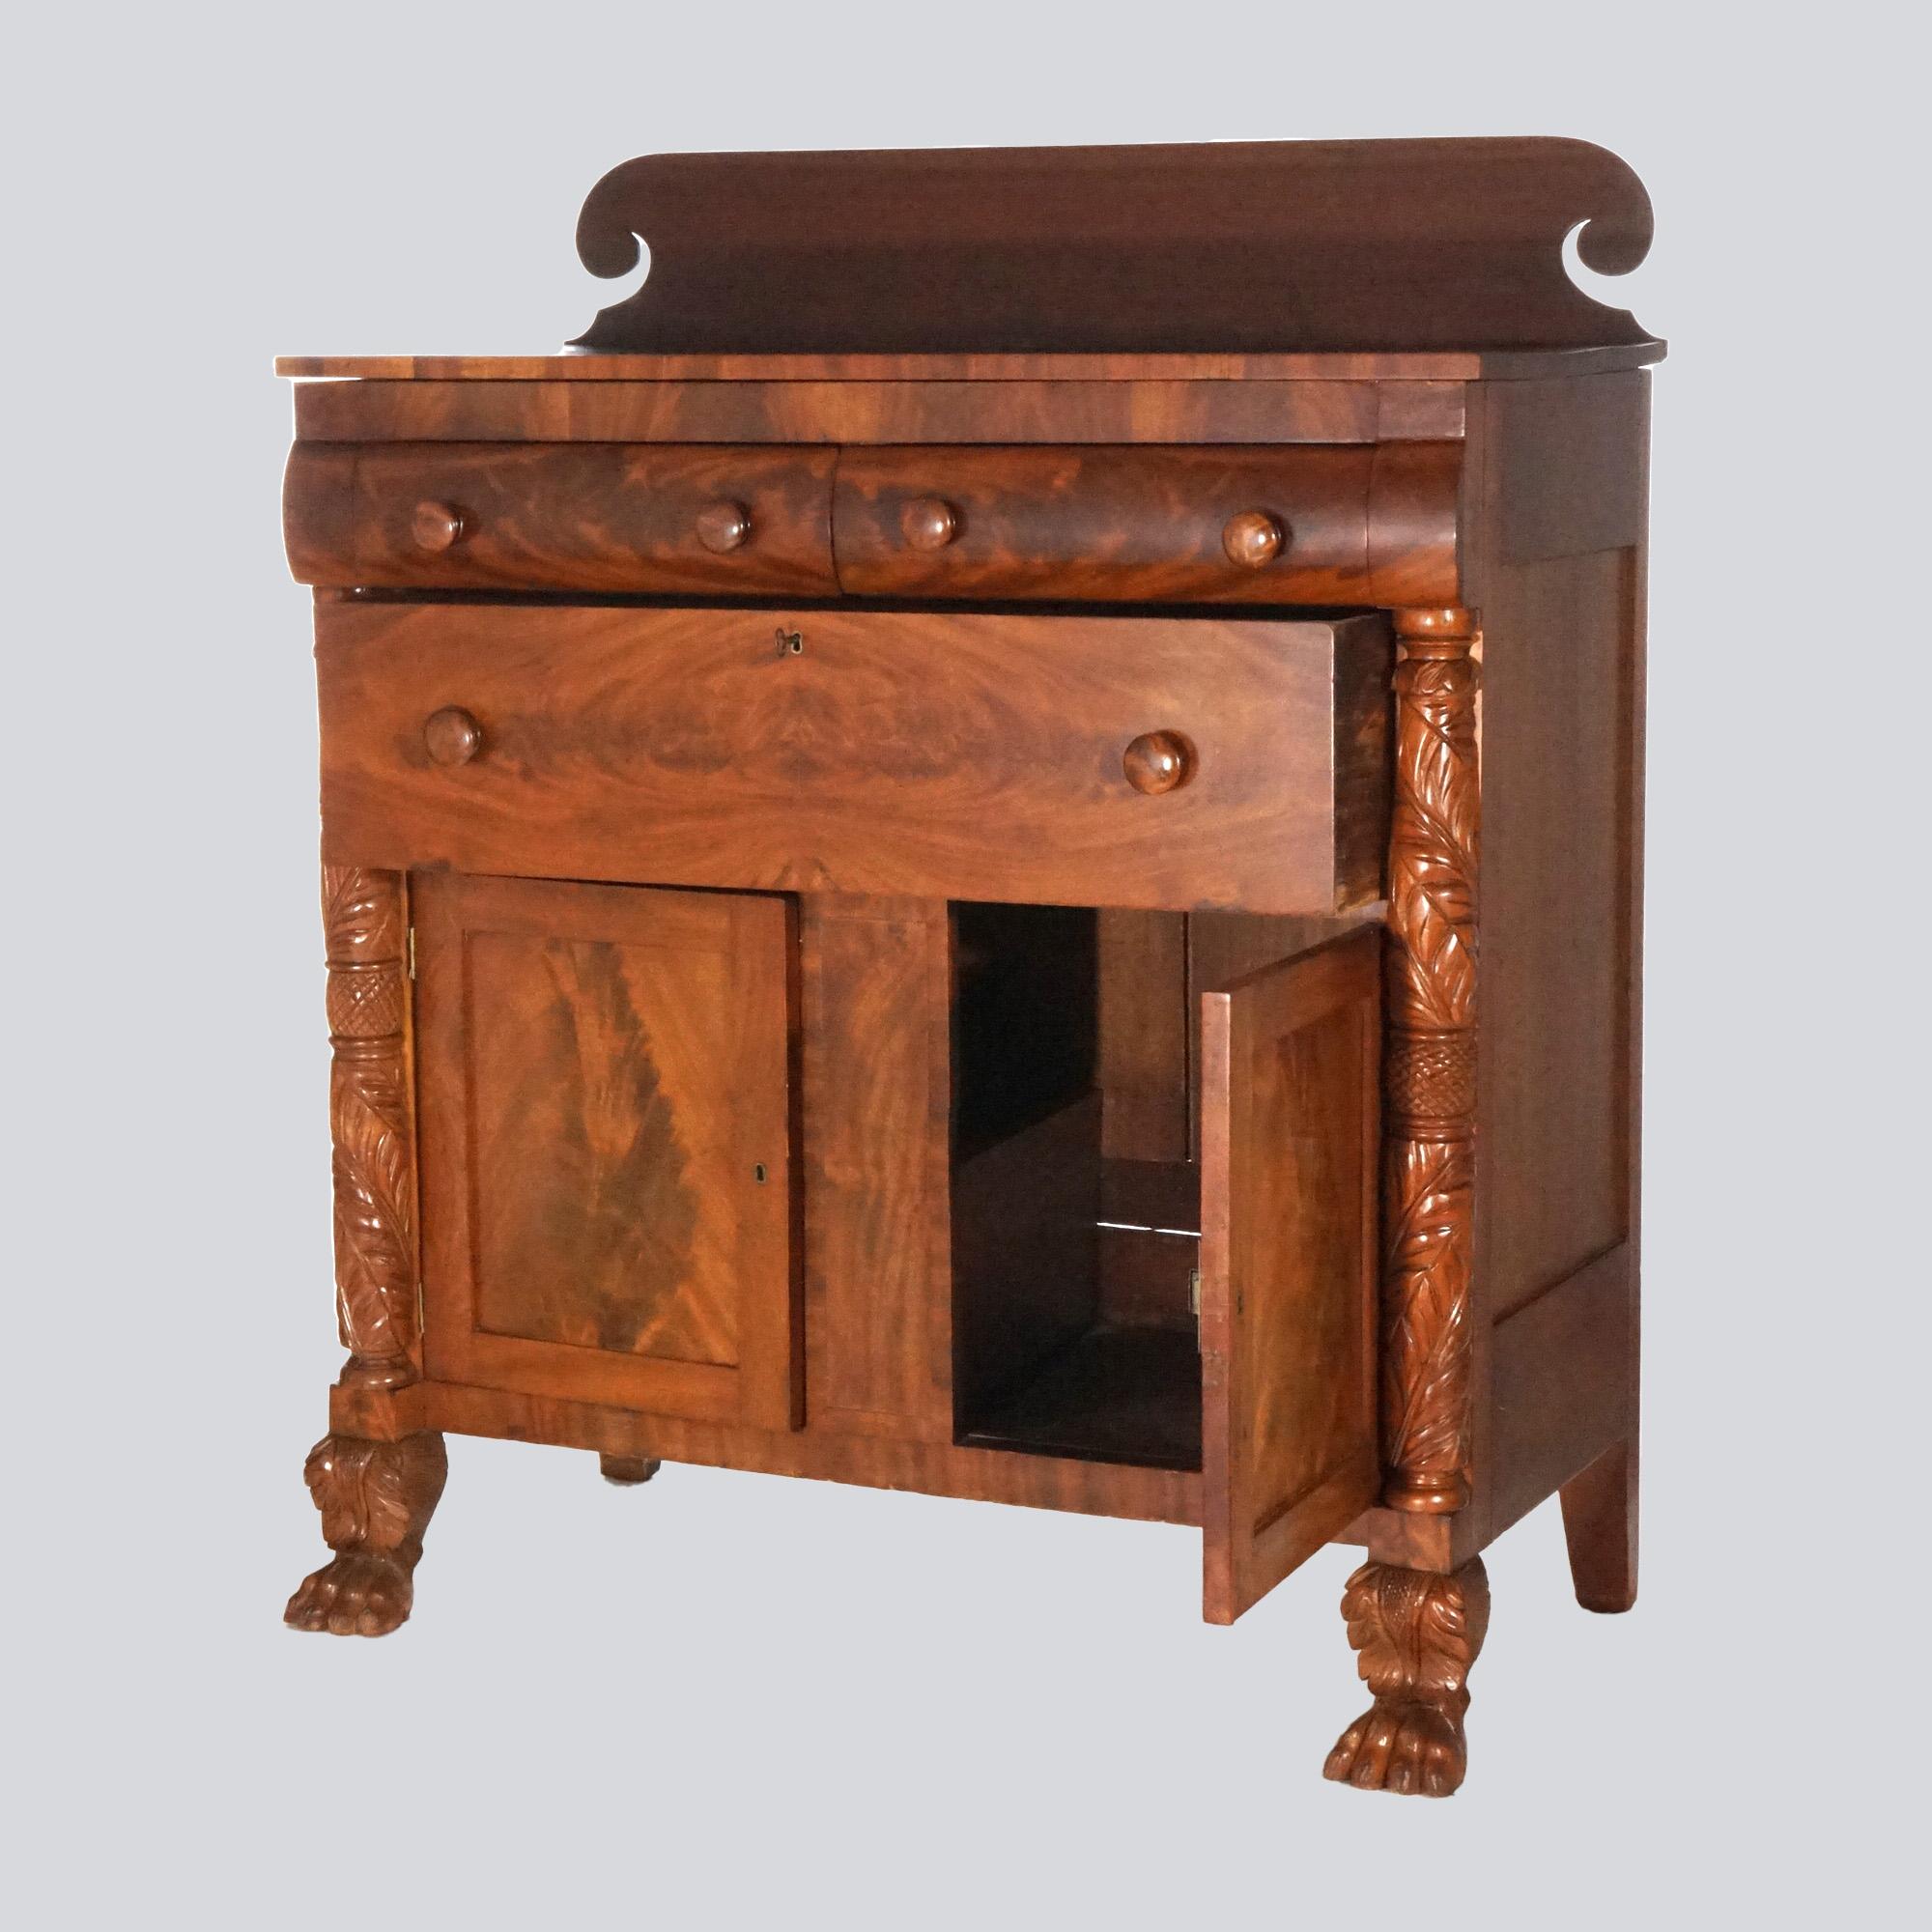 An antique Greco American Empire linen chest offers flame mahogany construction with scroll form backsplash over chest with convex drawers over long drawer and double door cabinet with flanking foliate carved columns terminating in carved paw feet,